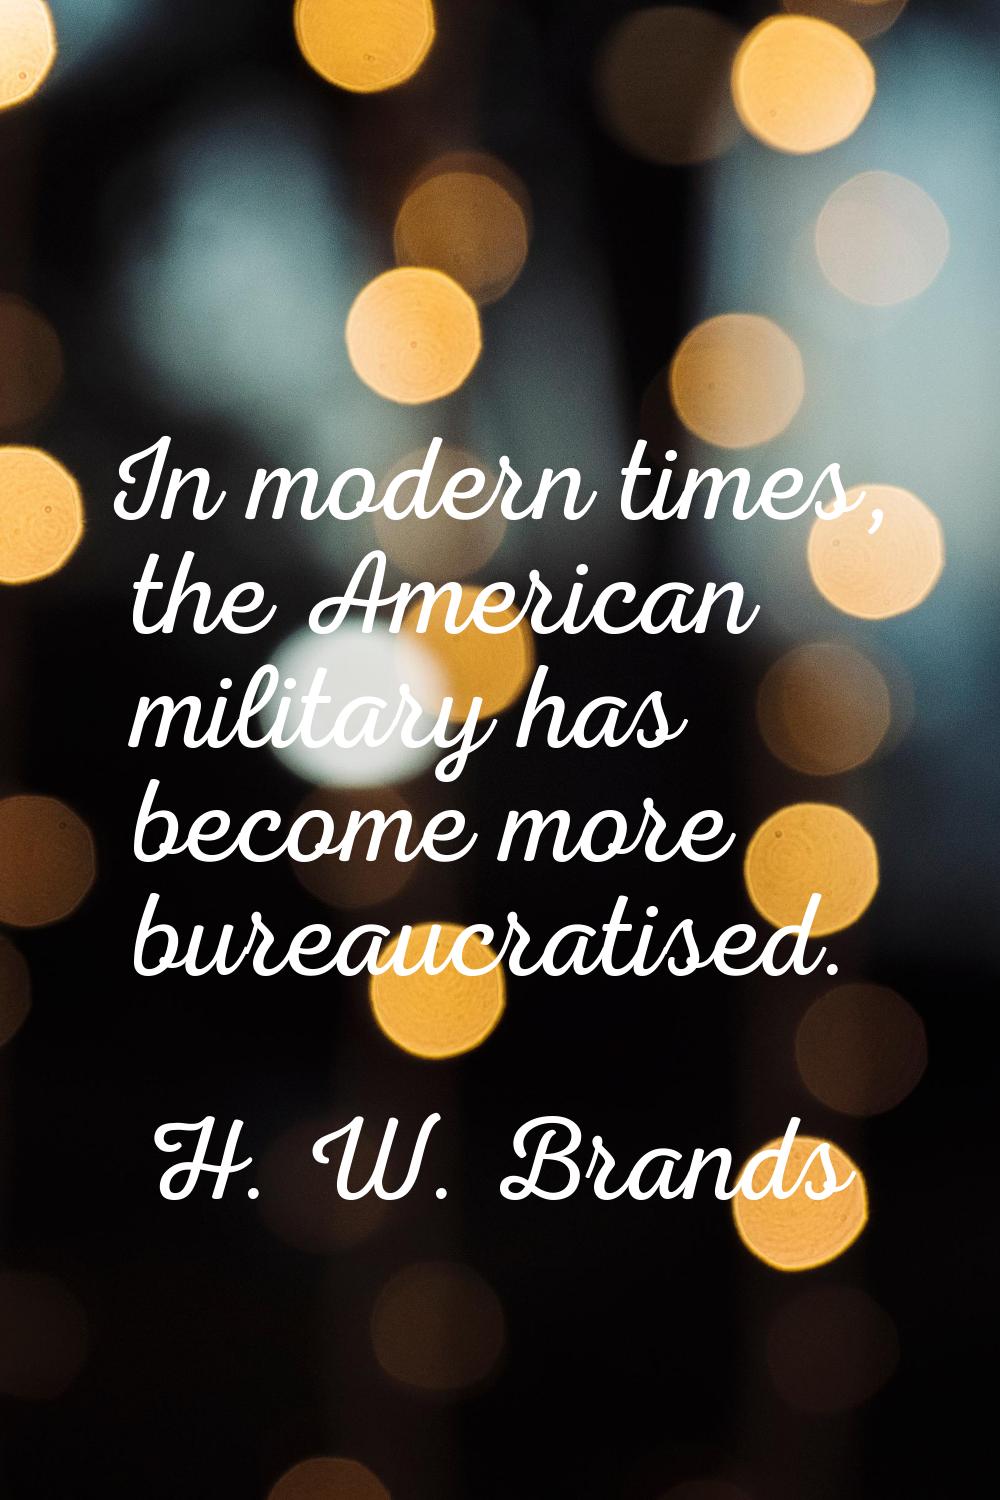 In modern times, the American military has become more bureaucratised.